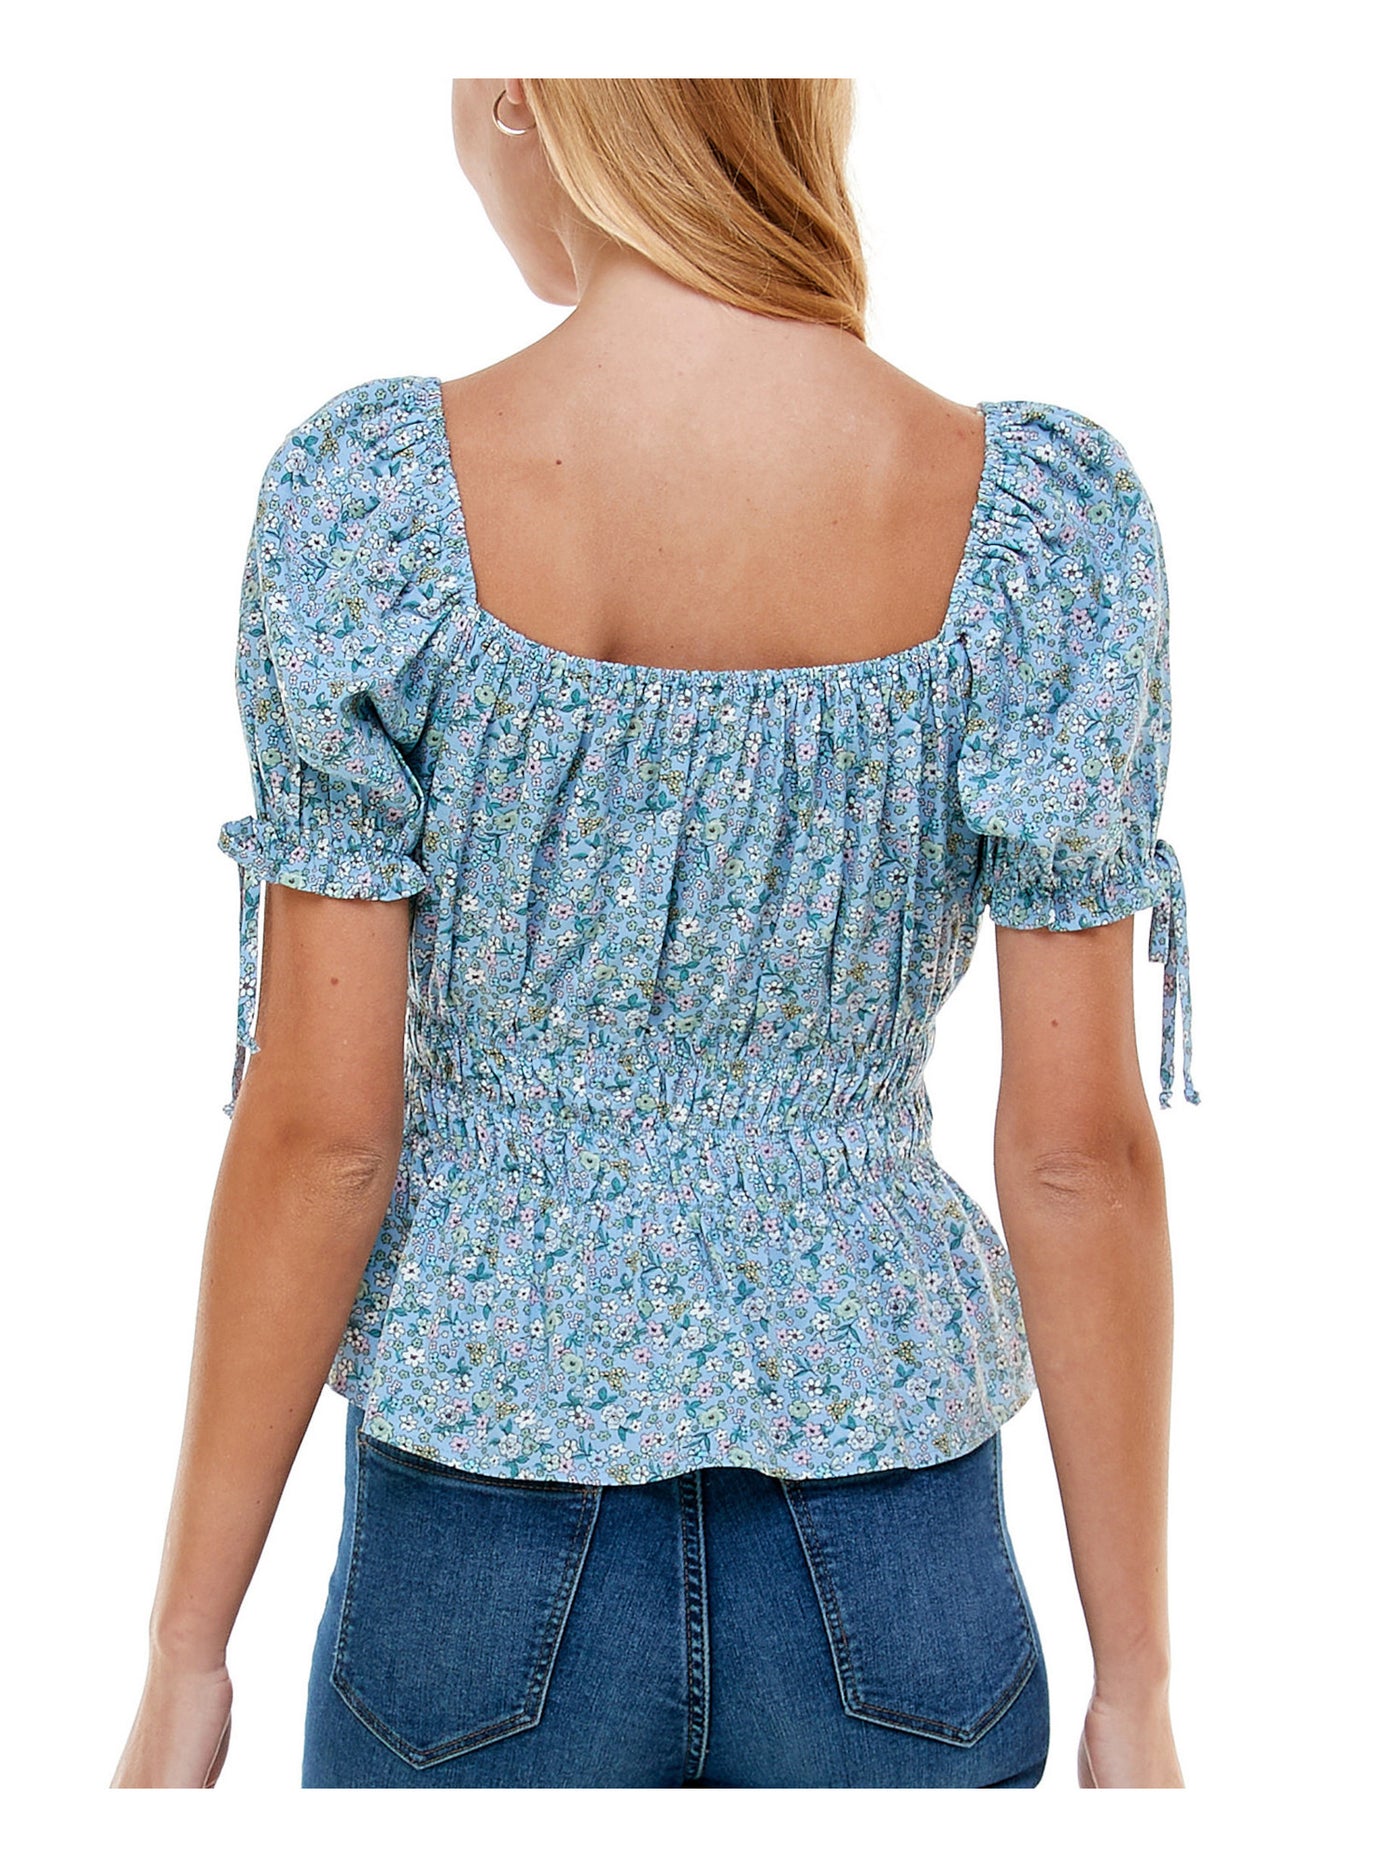 KINGSTON GREY Womens Light Blue Fitted Tie Floral Pouf Sleeve Square Neck Peplum Top Juniors M